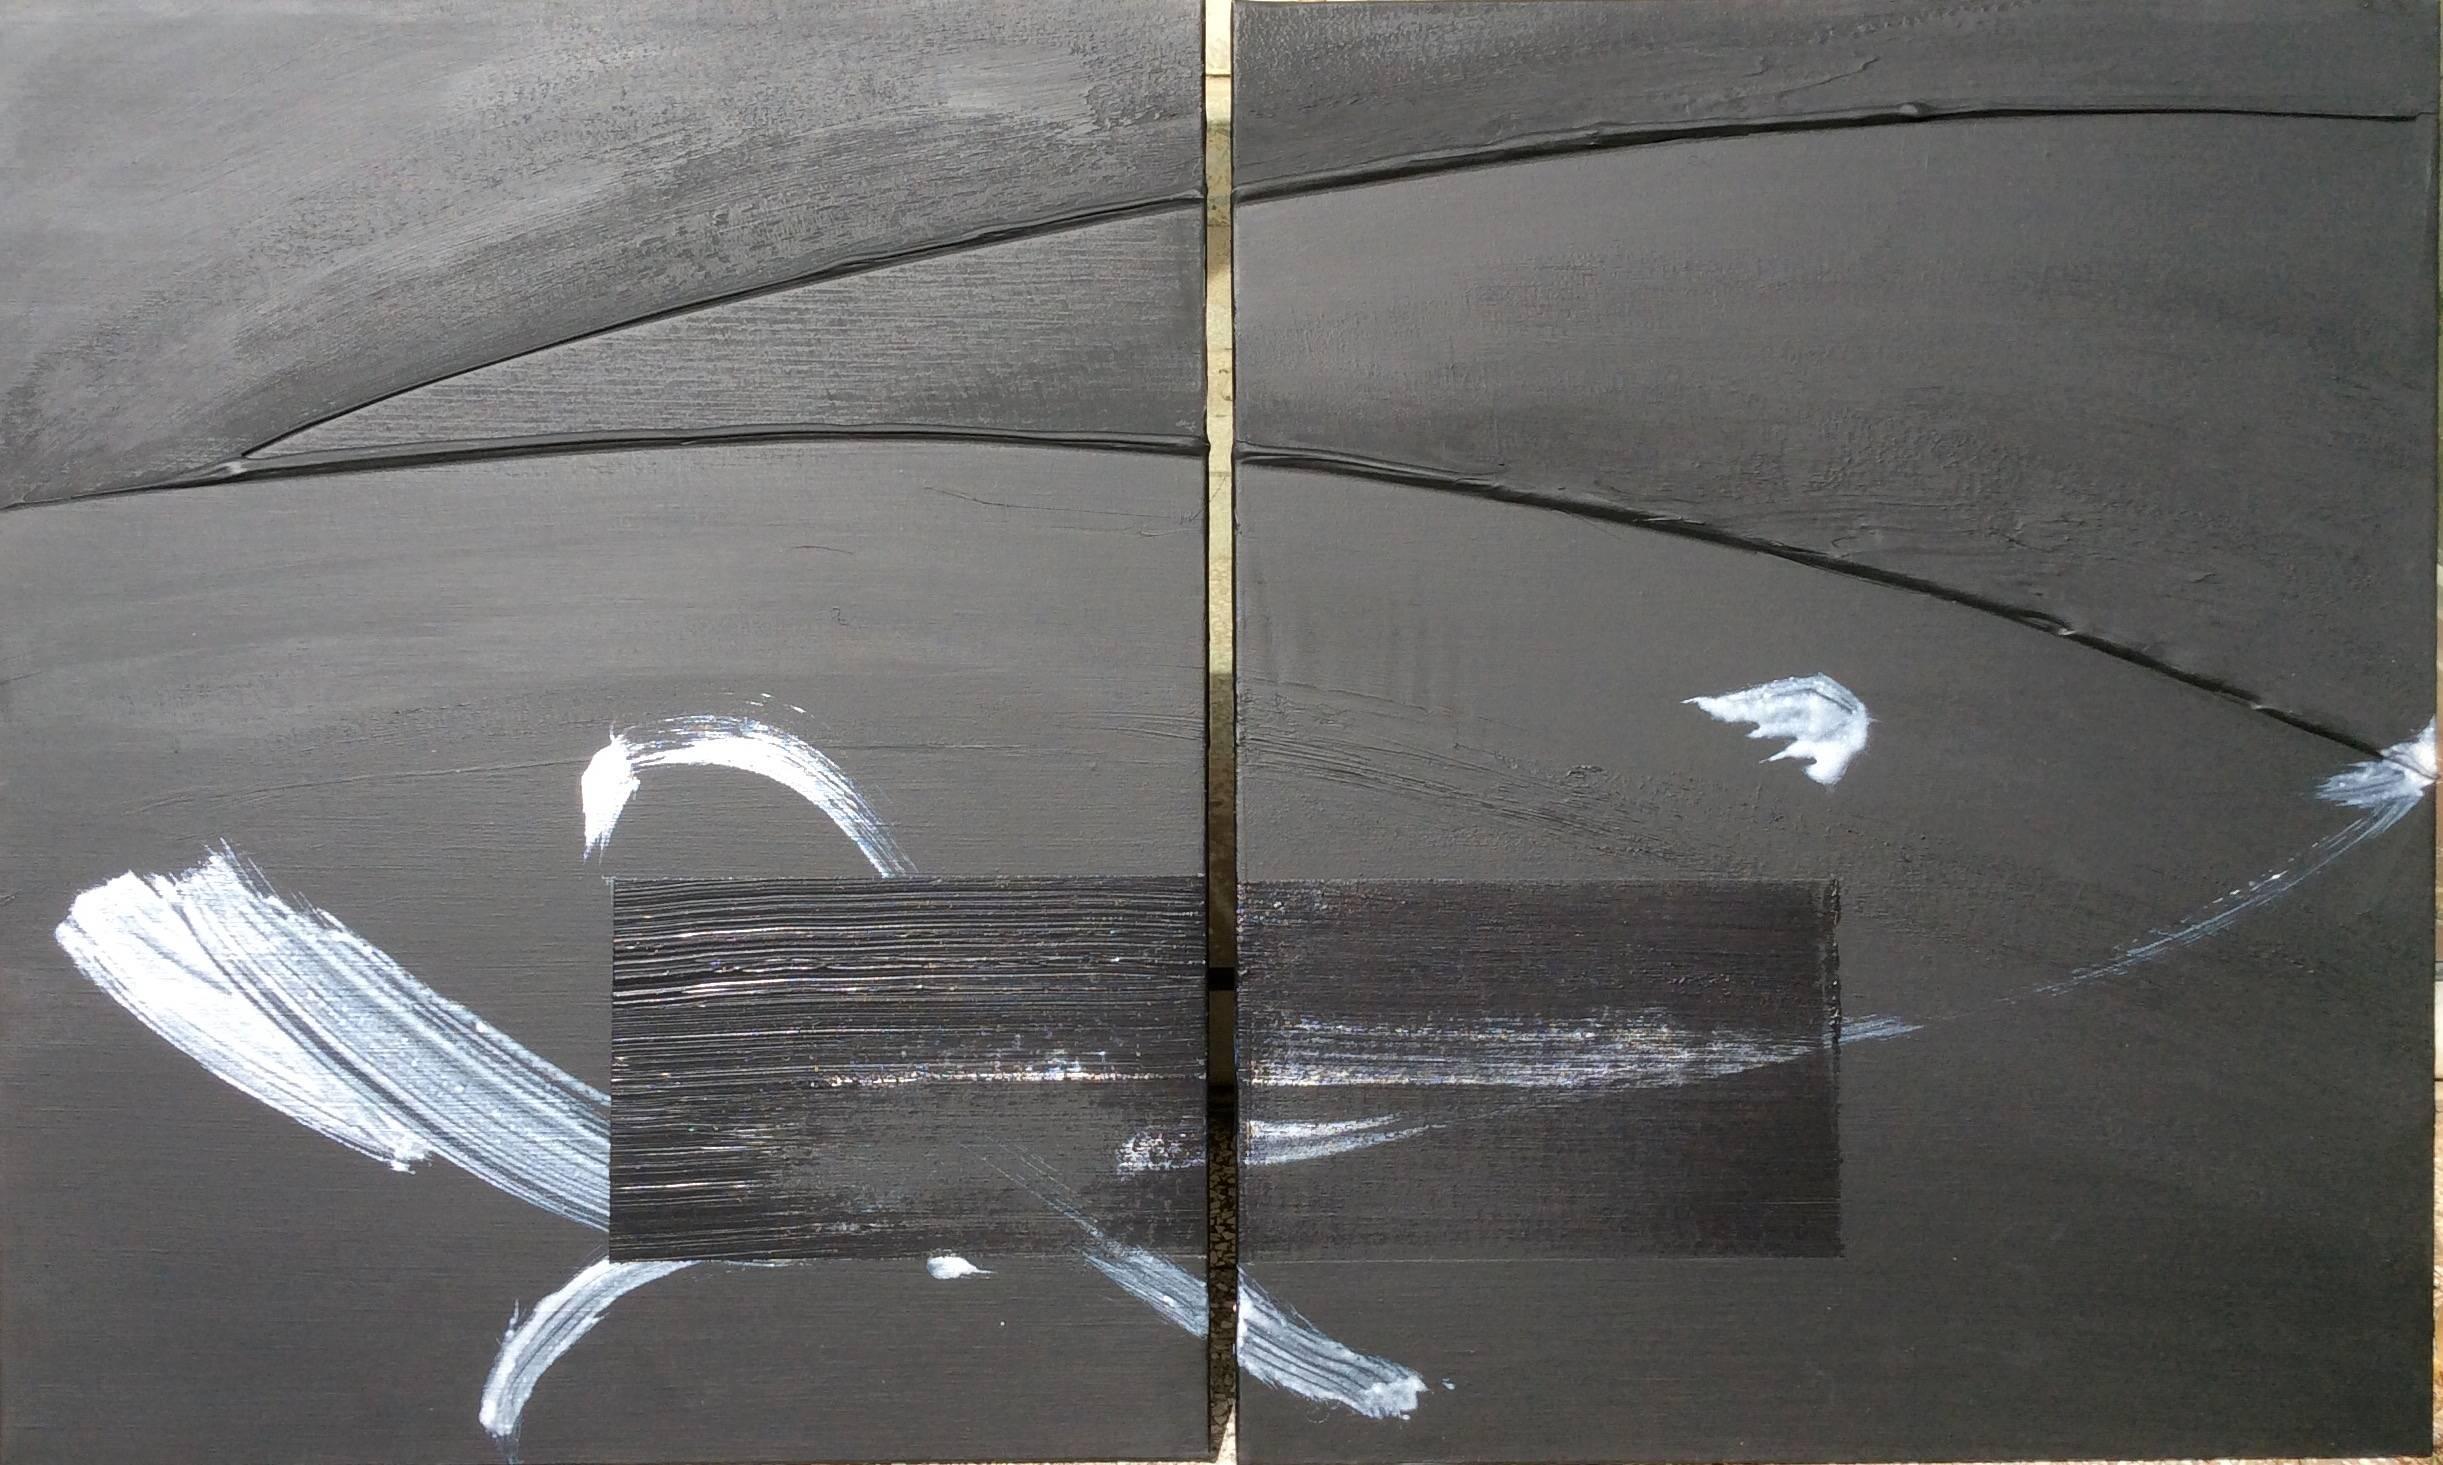 TN 686 D by Hachiro Kanno - Abstraction & Japanese Calligraphy, Diptych painting